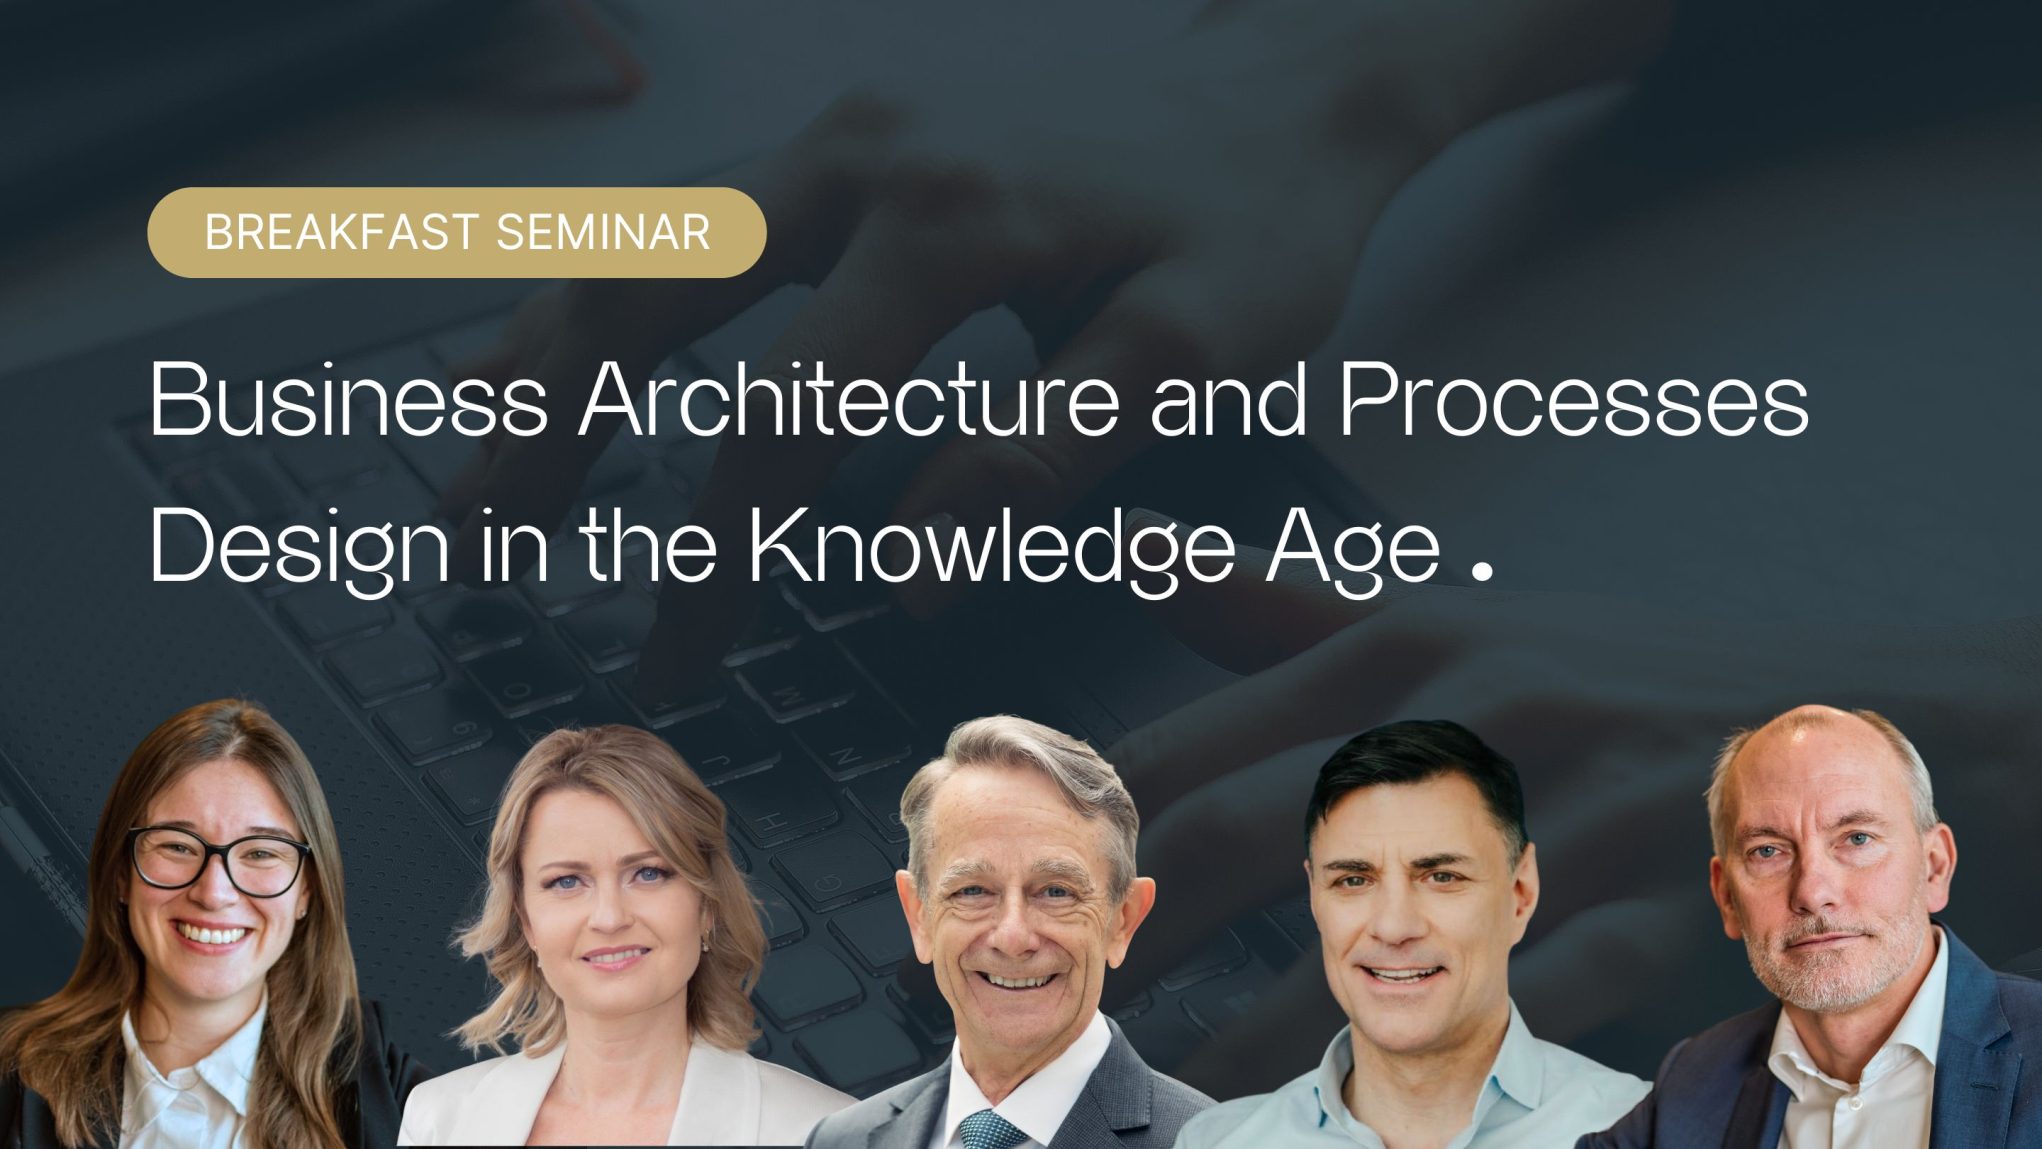 Breakfast seminar: Business Architecture and Processes Design in the Knowledge Age